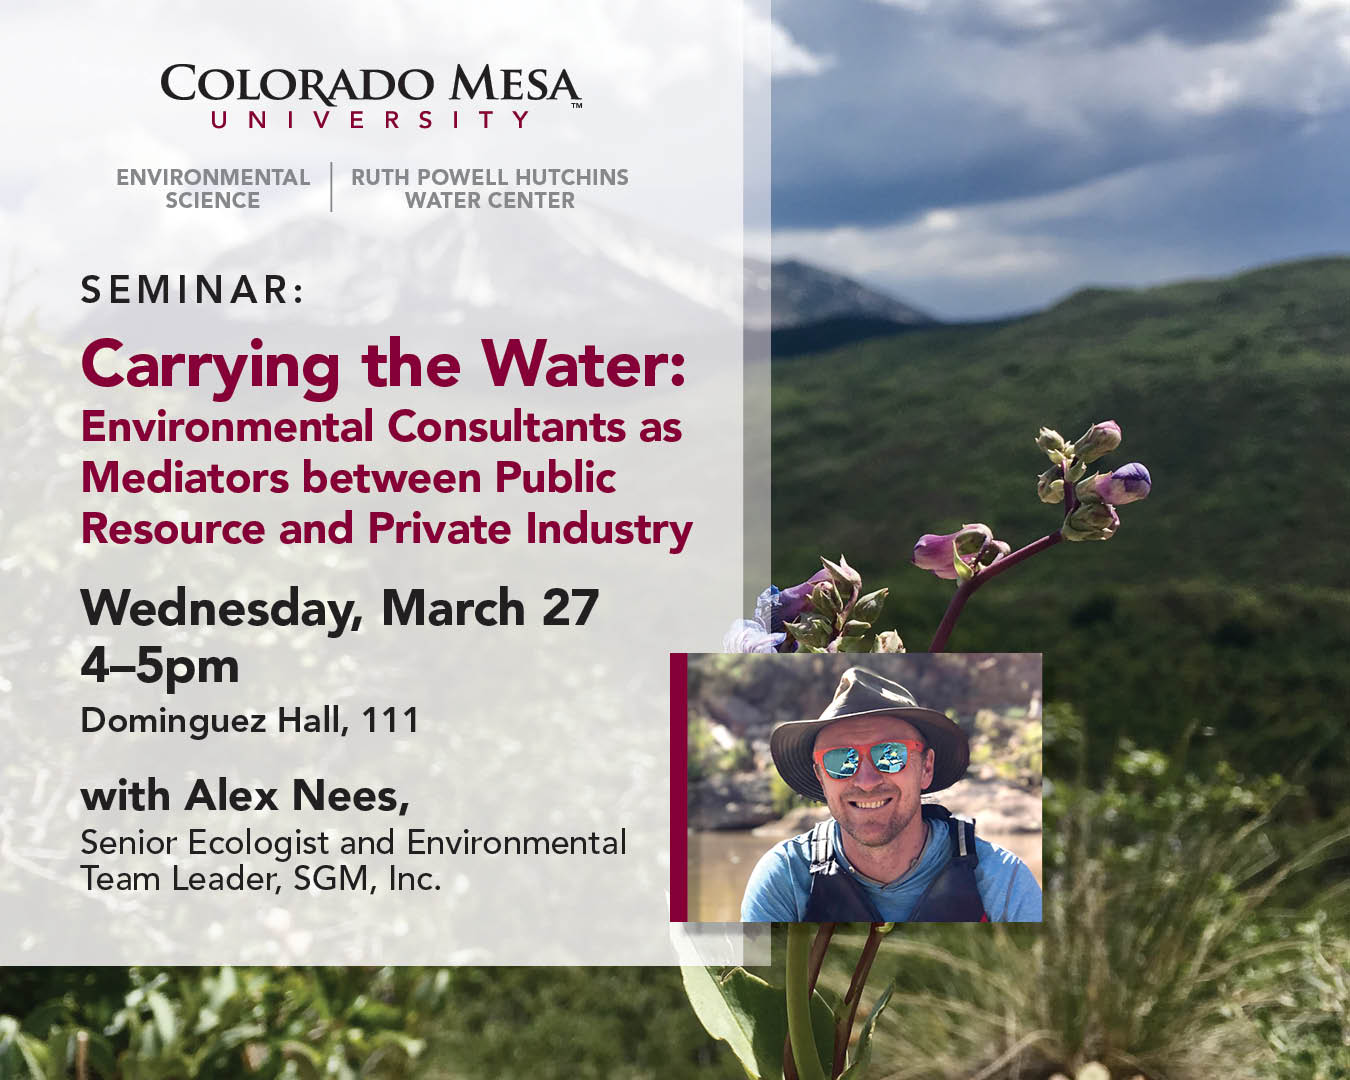 Environmental Science and Hutchins Water Center Seminar: Carrying the Water: Environmental Consultants as Mediators between Public Resource and Private Industry